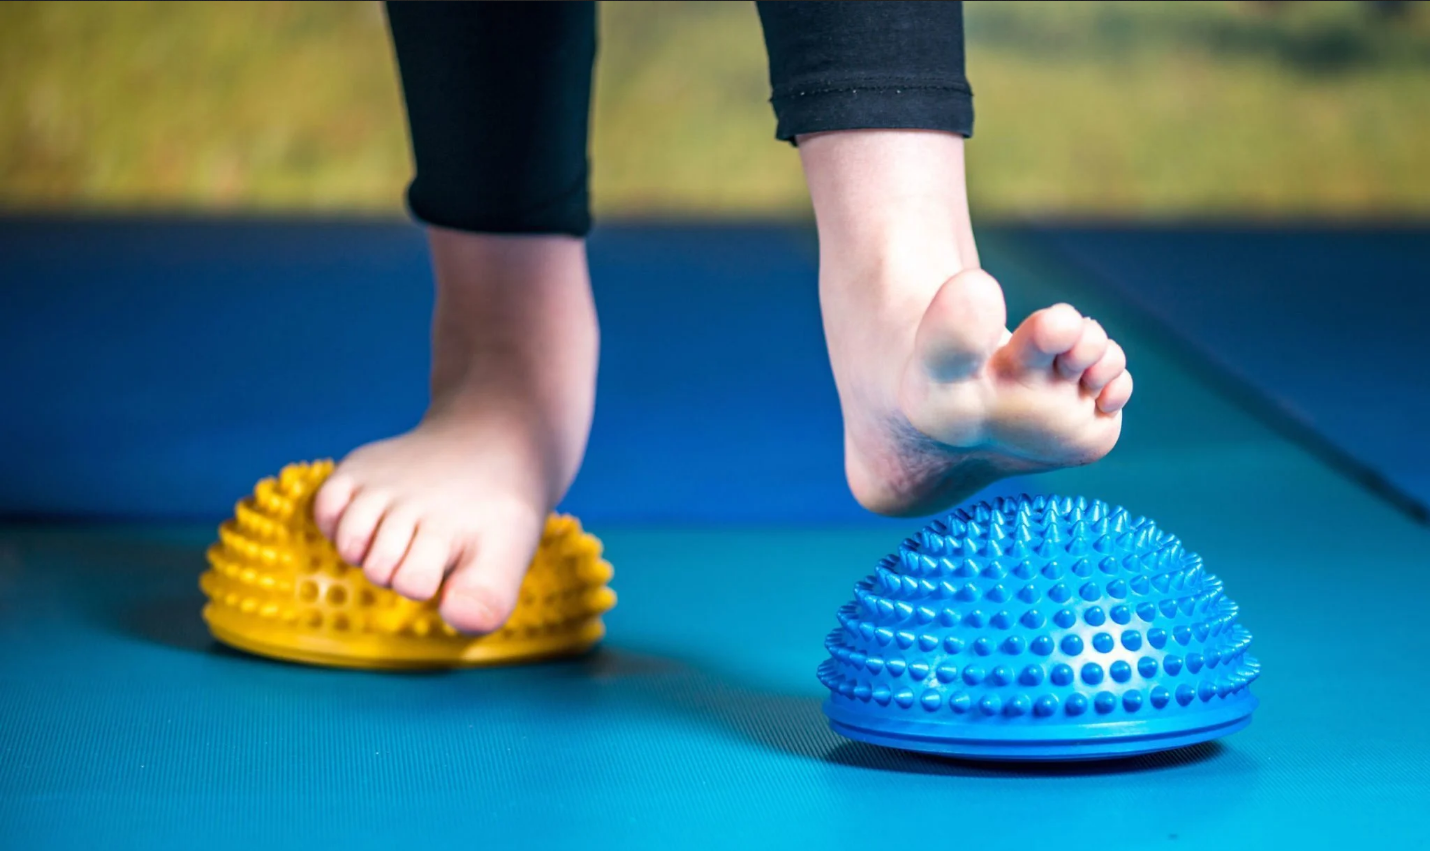 Remedies for Flat Foot Pain Caused by Your Flip-Flops